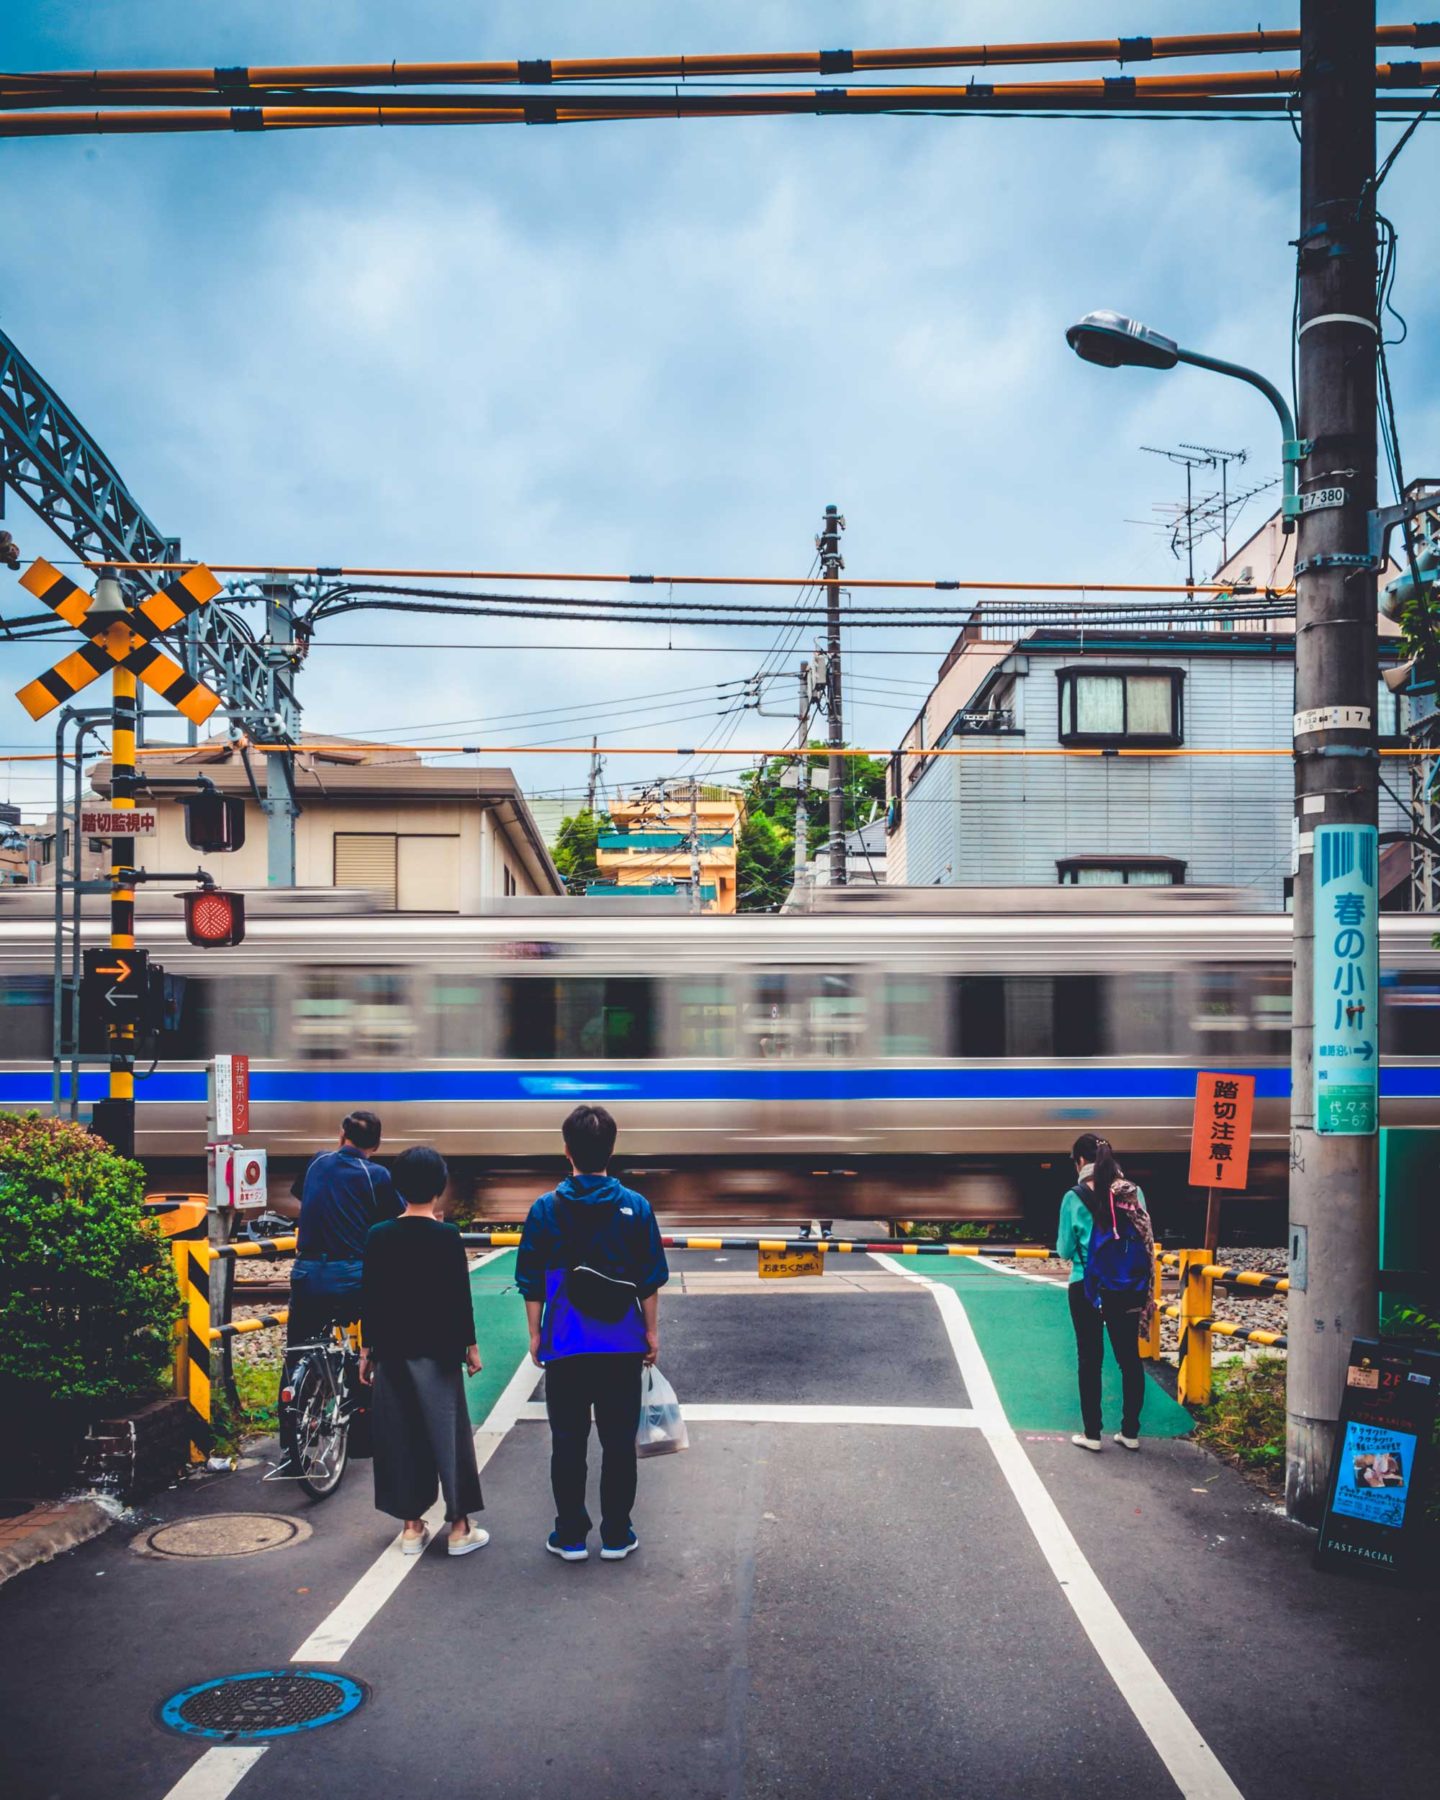 Few pedestrians waiting for a whizzing train to go past, Tokyo